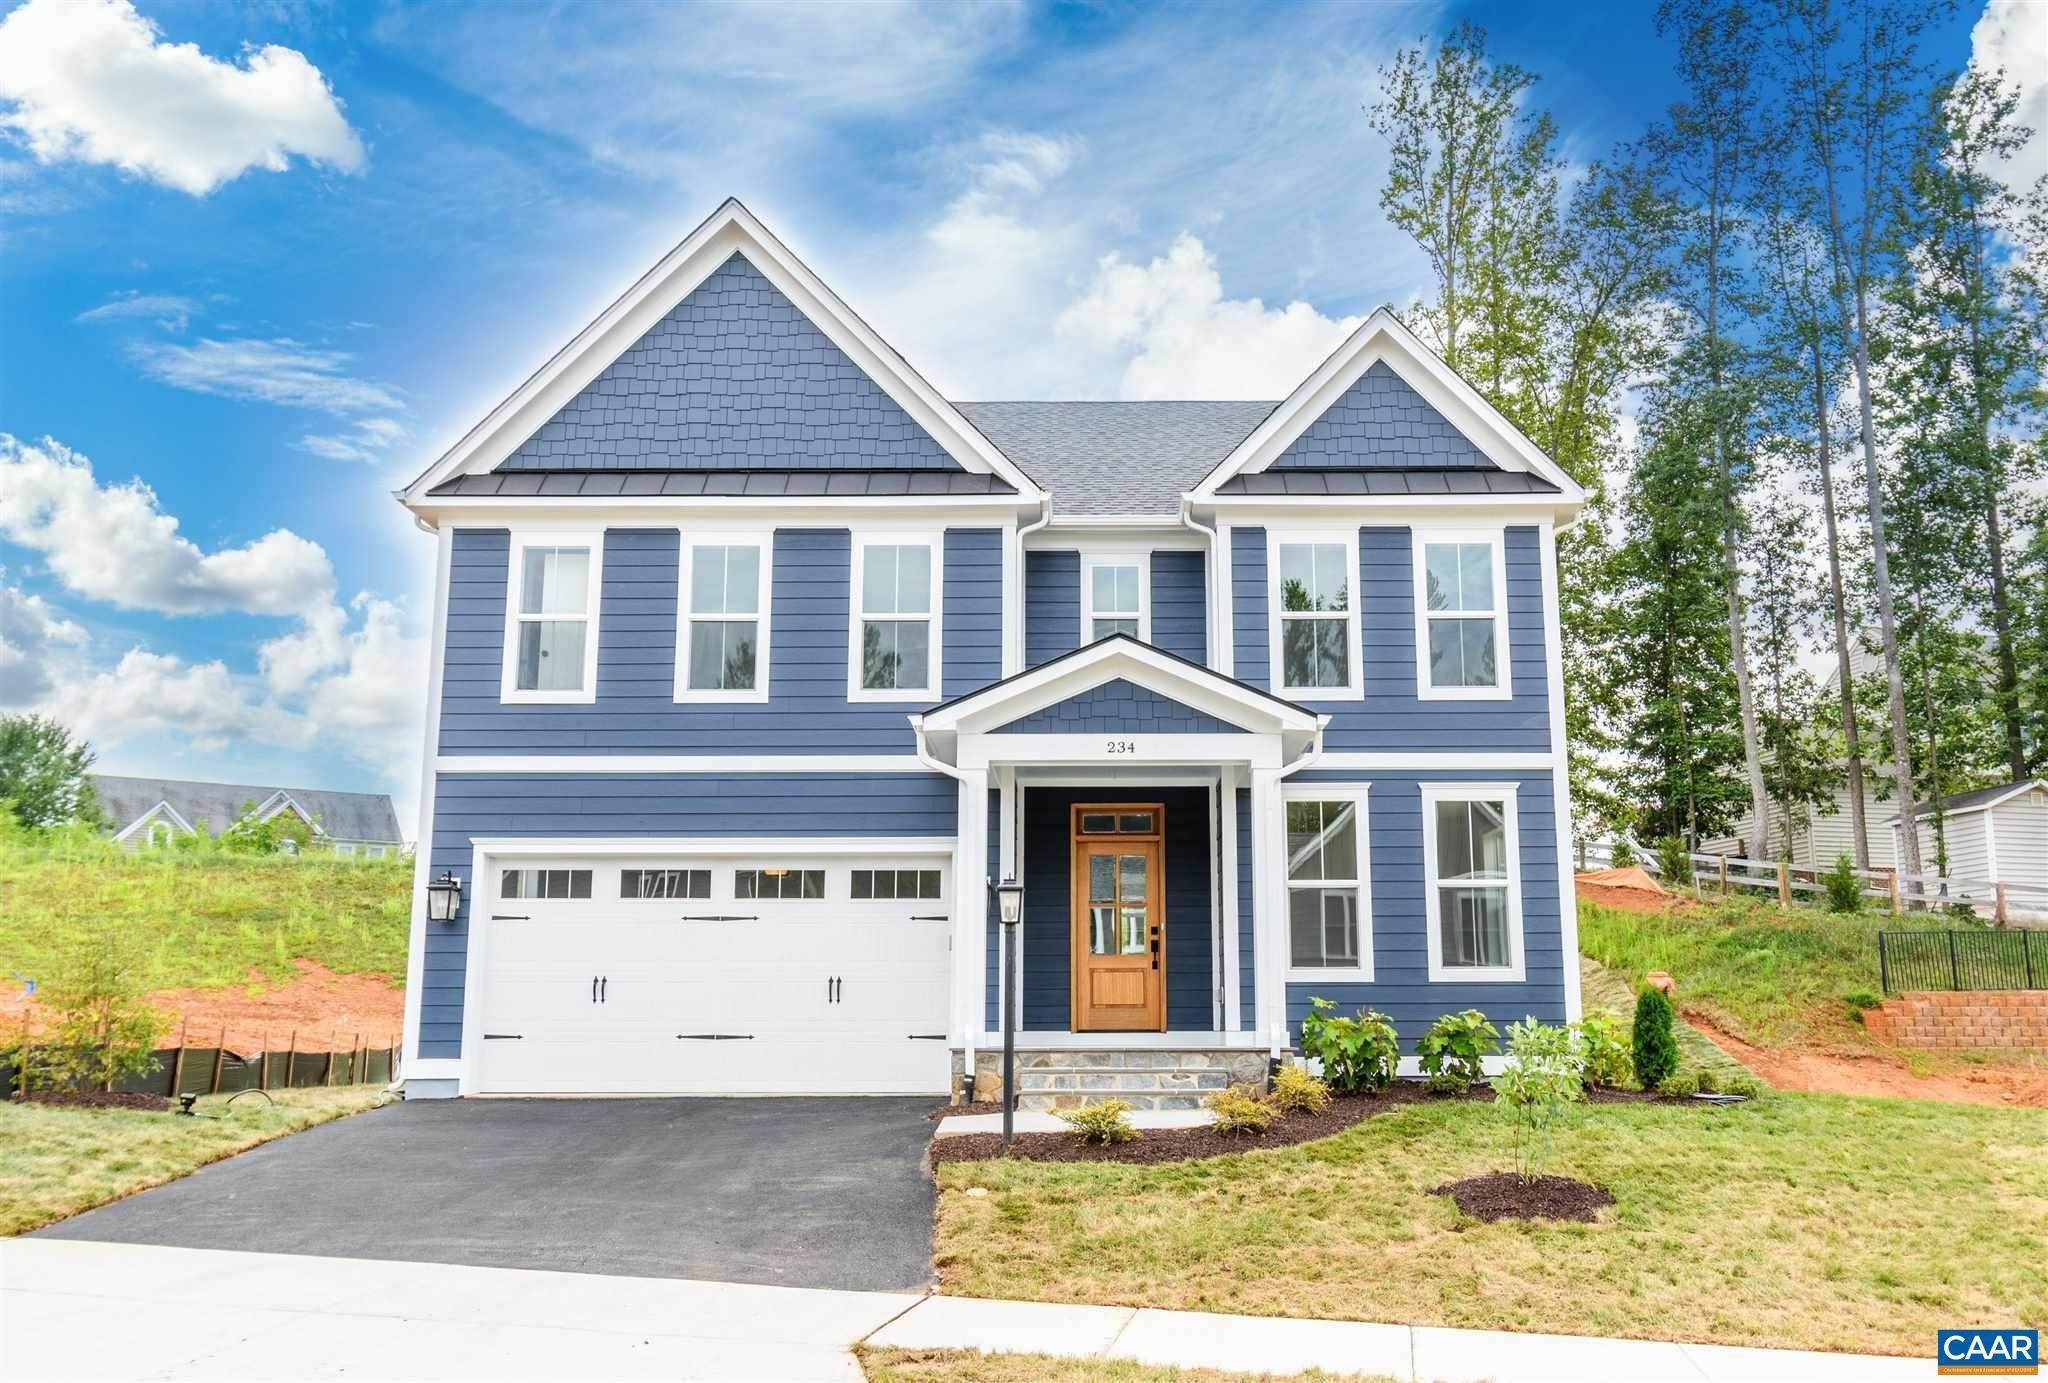 Single Family Homes for Sale at H1-02 BEAR ISLAND PKWY Zion Crossroads, Virginia 22942 United States